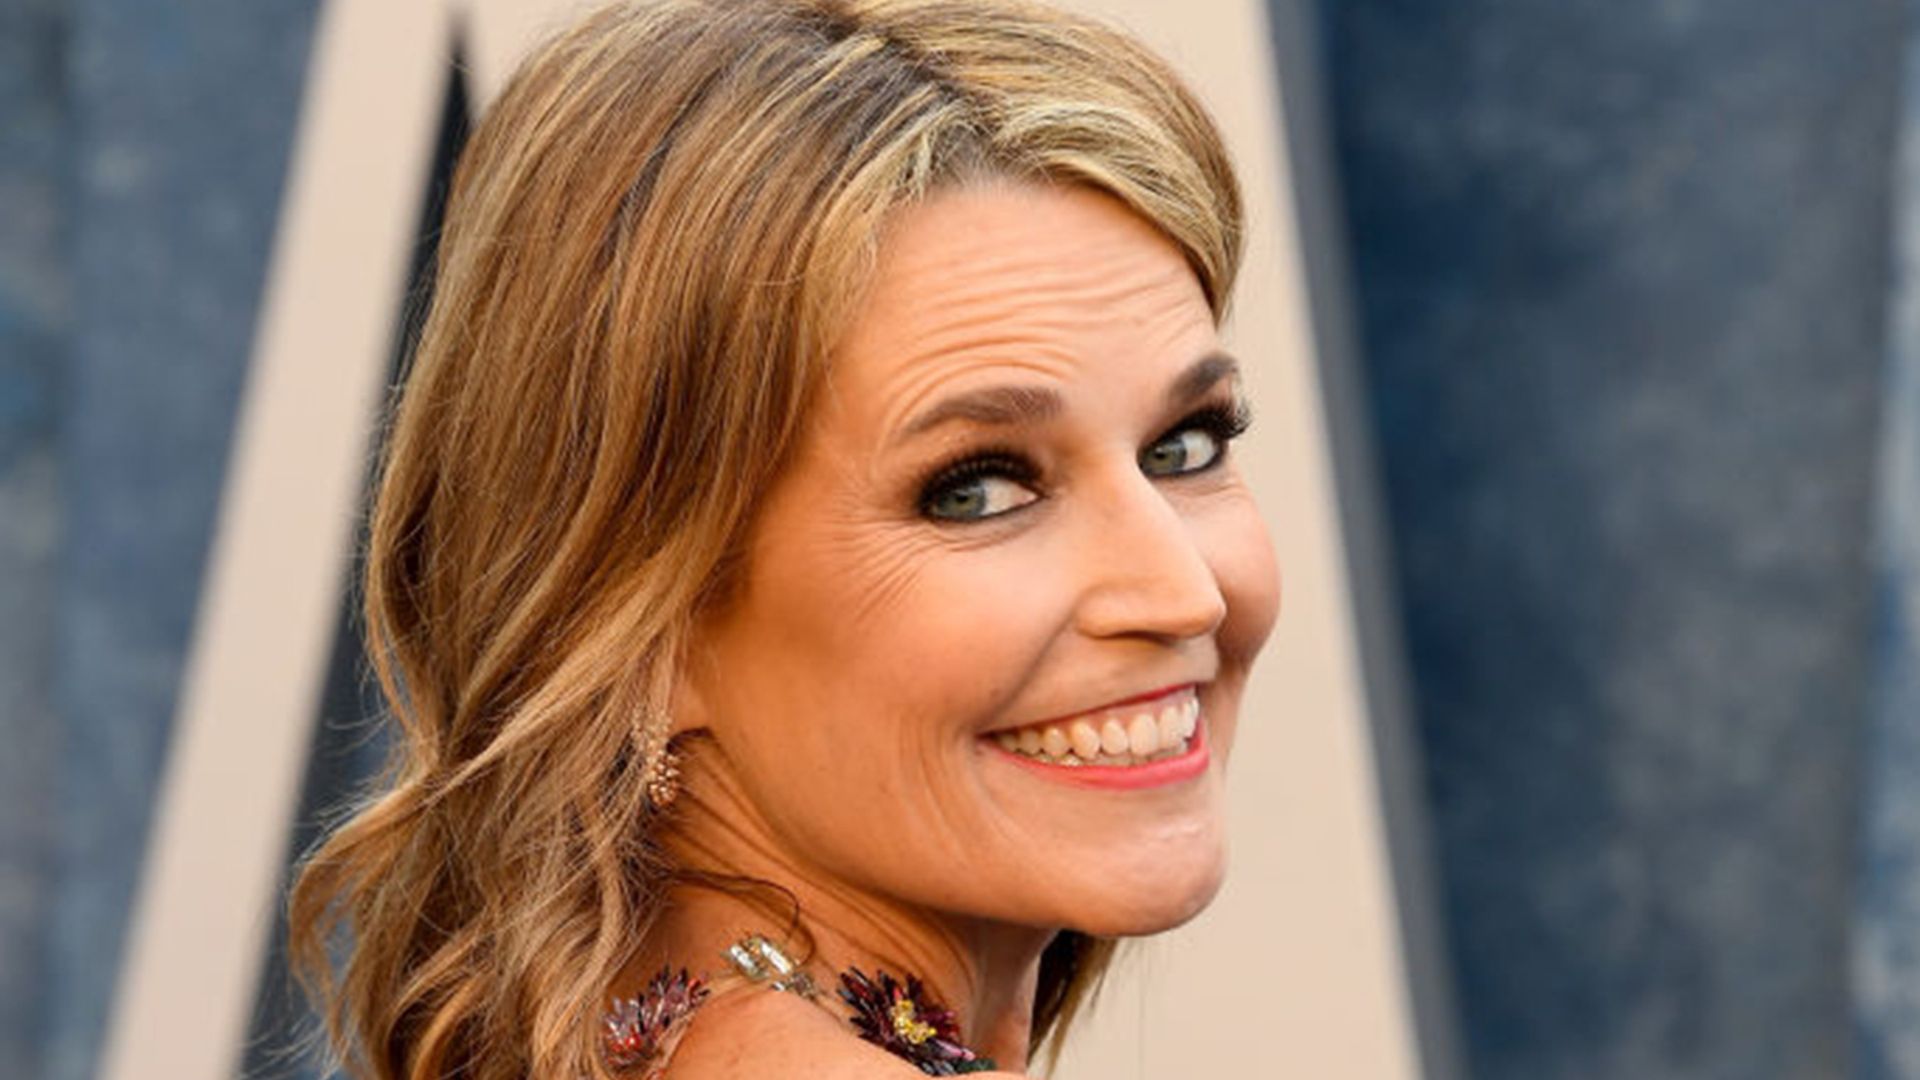 Savannah Guthrie showcases bold new look during live Today show fans